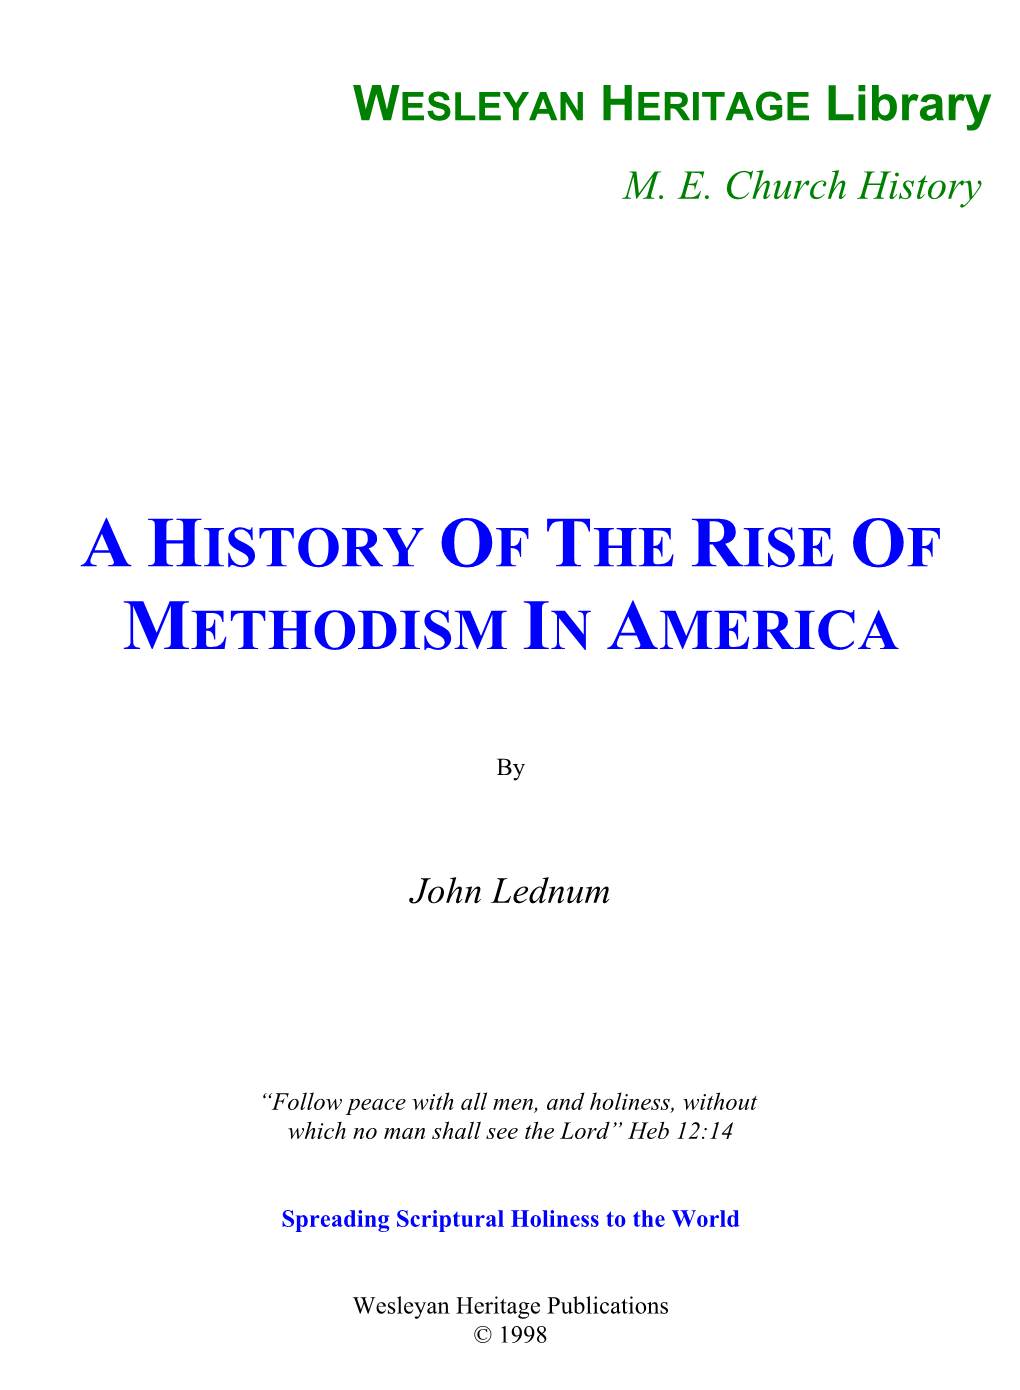 A History of the Rise of Methodism in America